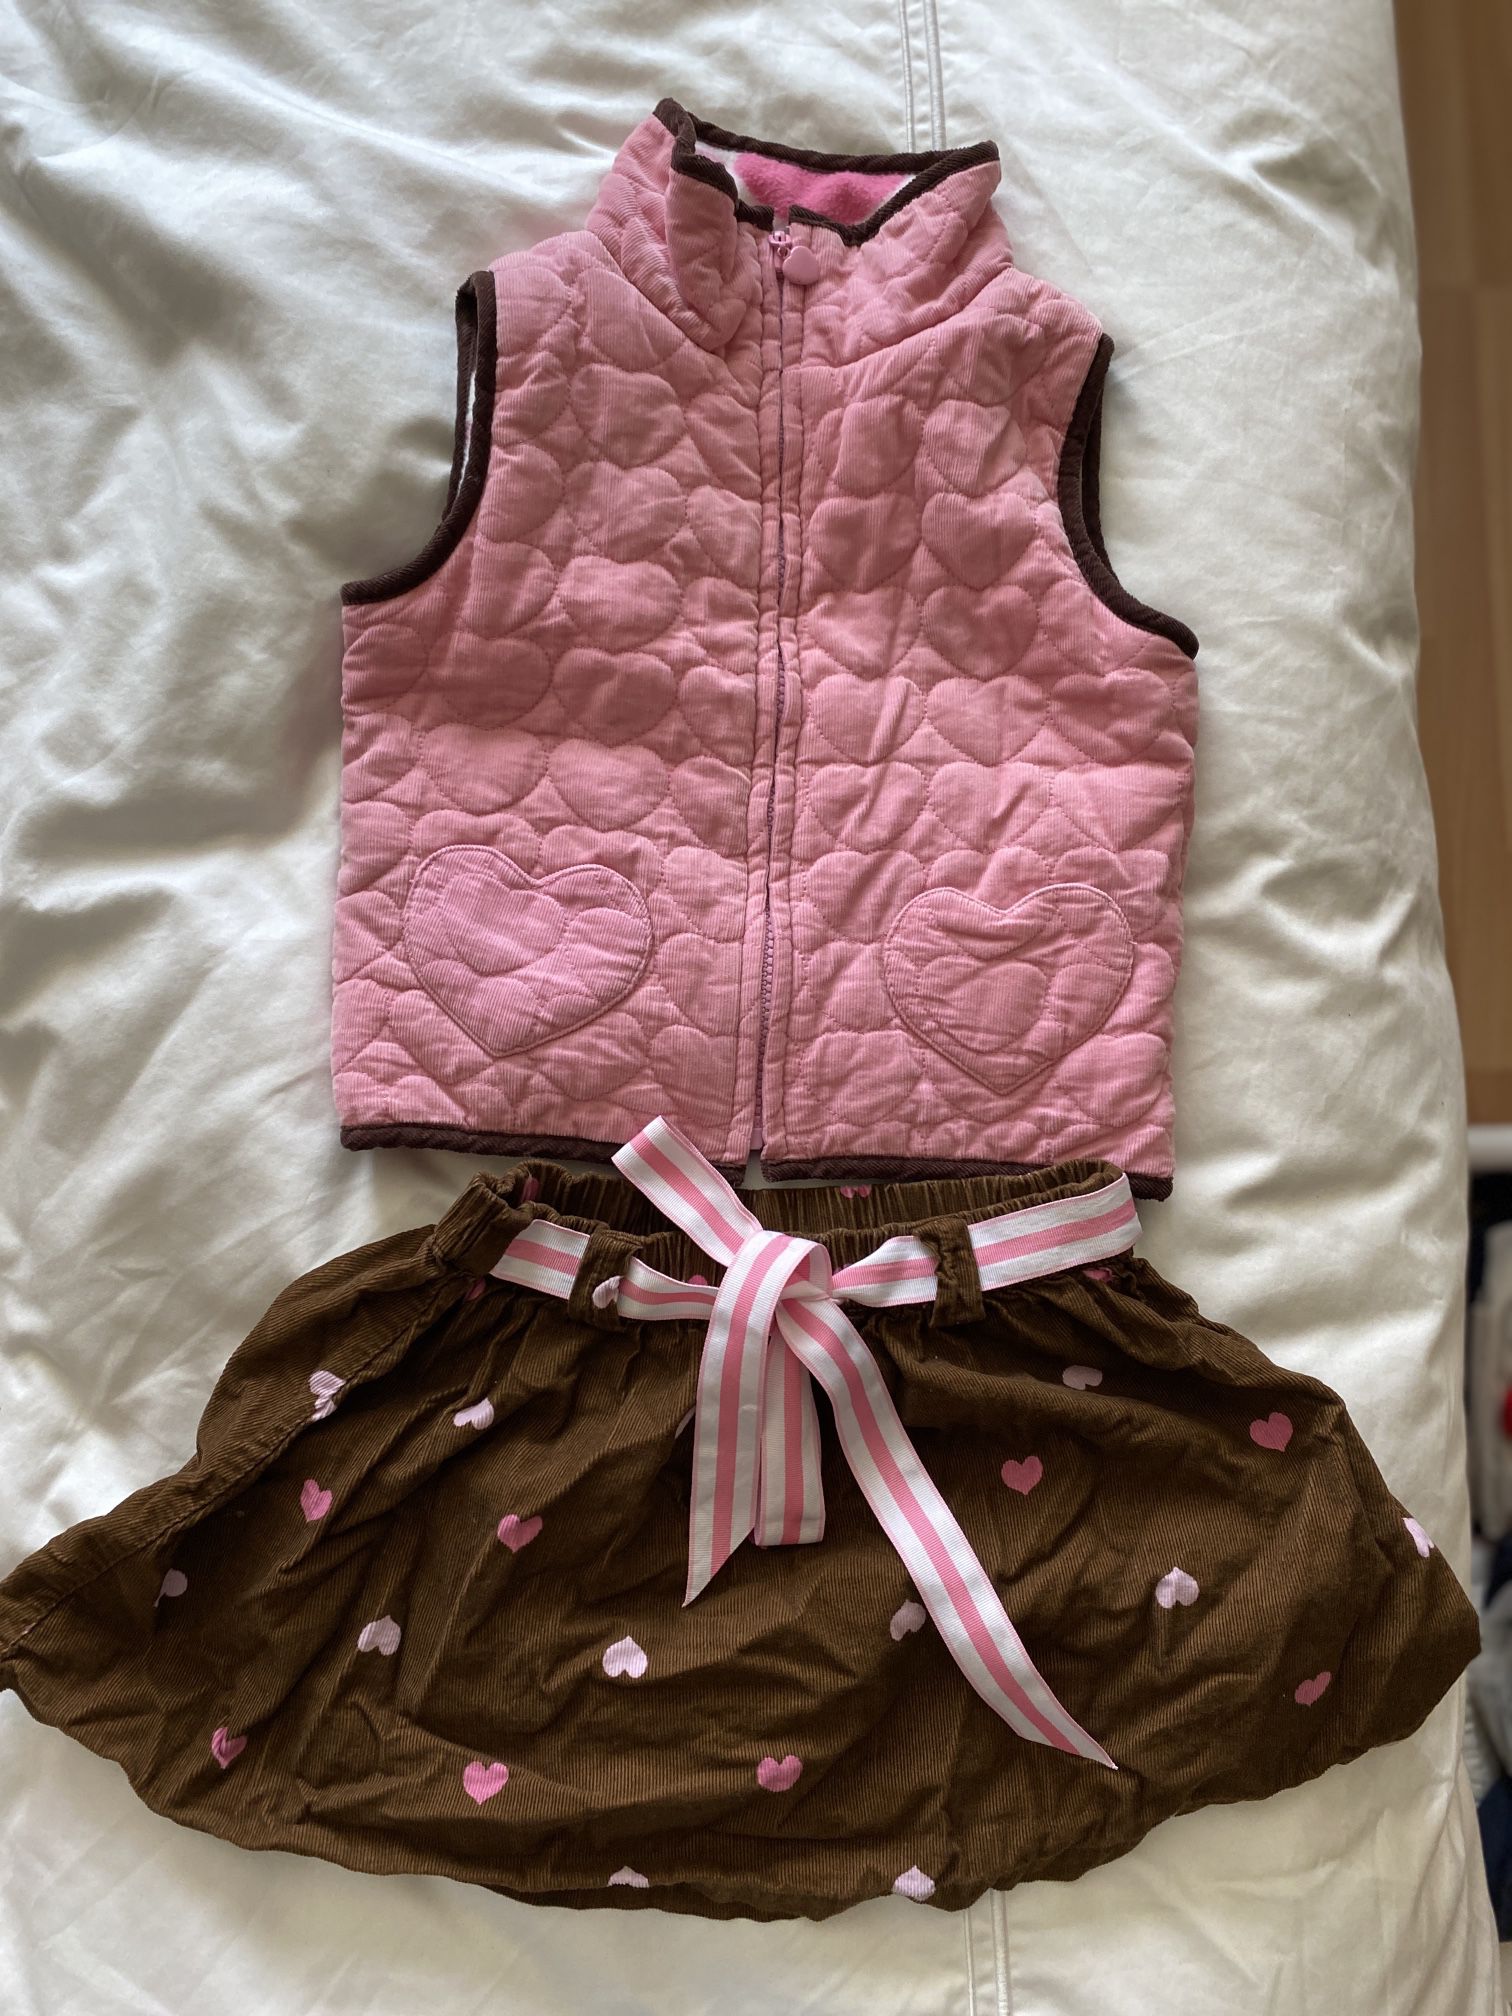 American Doll & Girl’s Outfit Size 4-5 Years Old